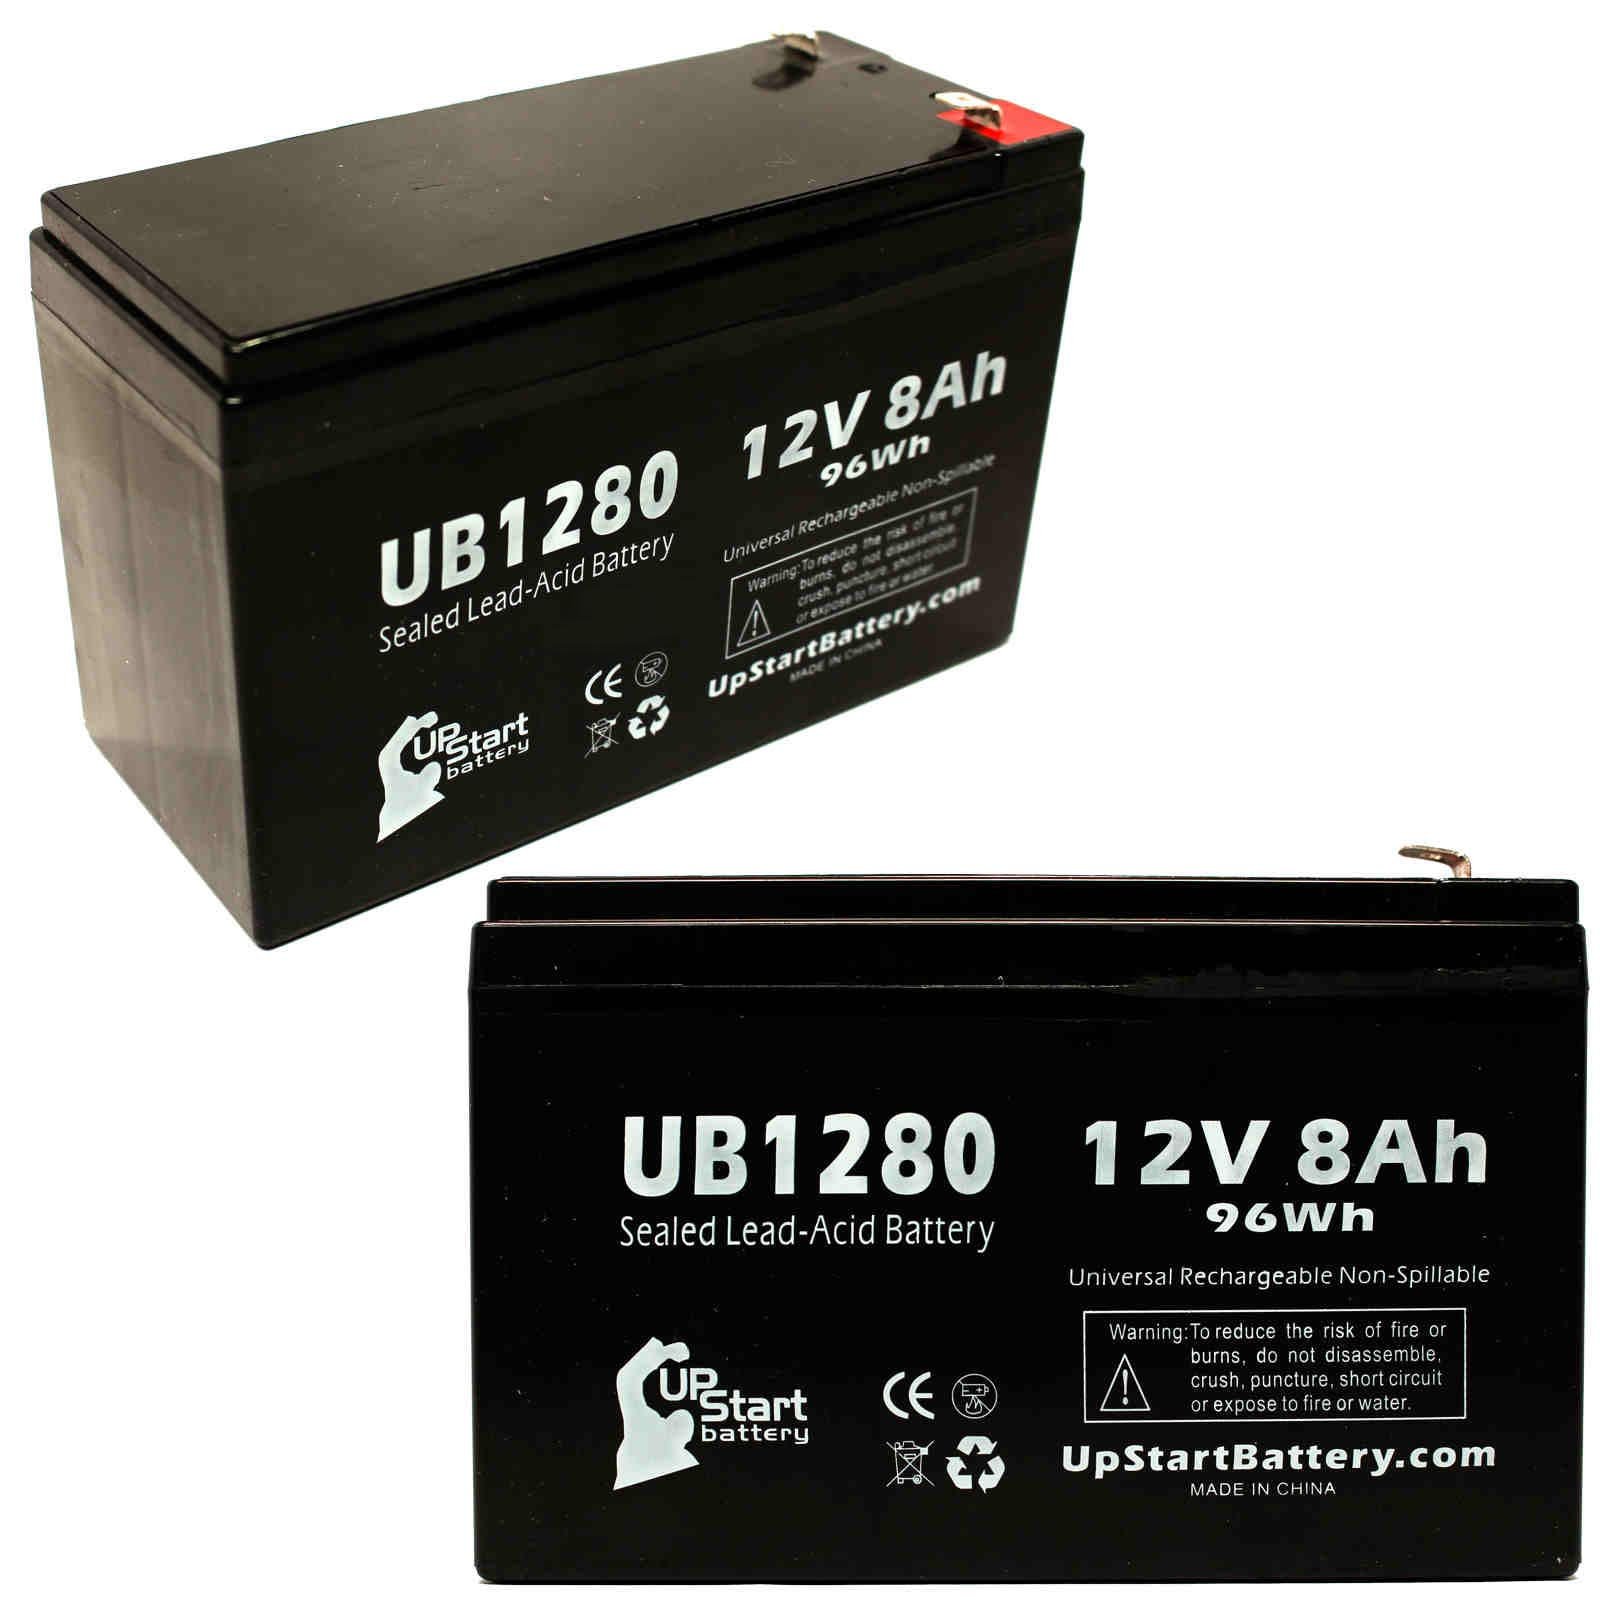 2 Pack - UB1280 Universal Sealed Lead Acid Battery Replacement (12V, 8Ah, 8000mAh, F1 Terminal, AGM, SLA) - Includes 4 F1 to F2 Terminal Adapters